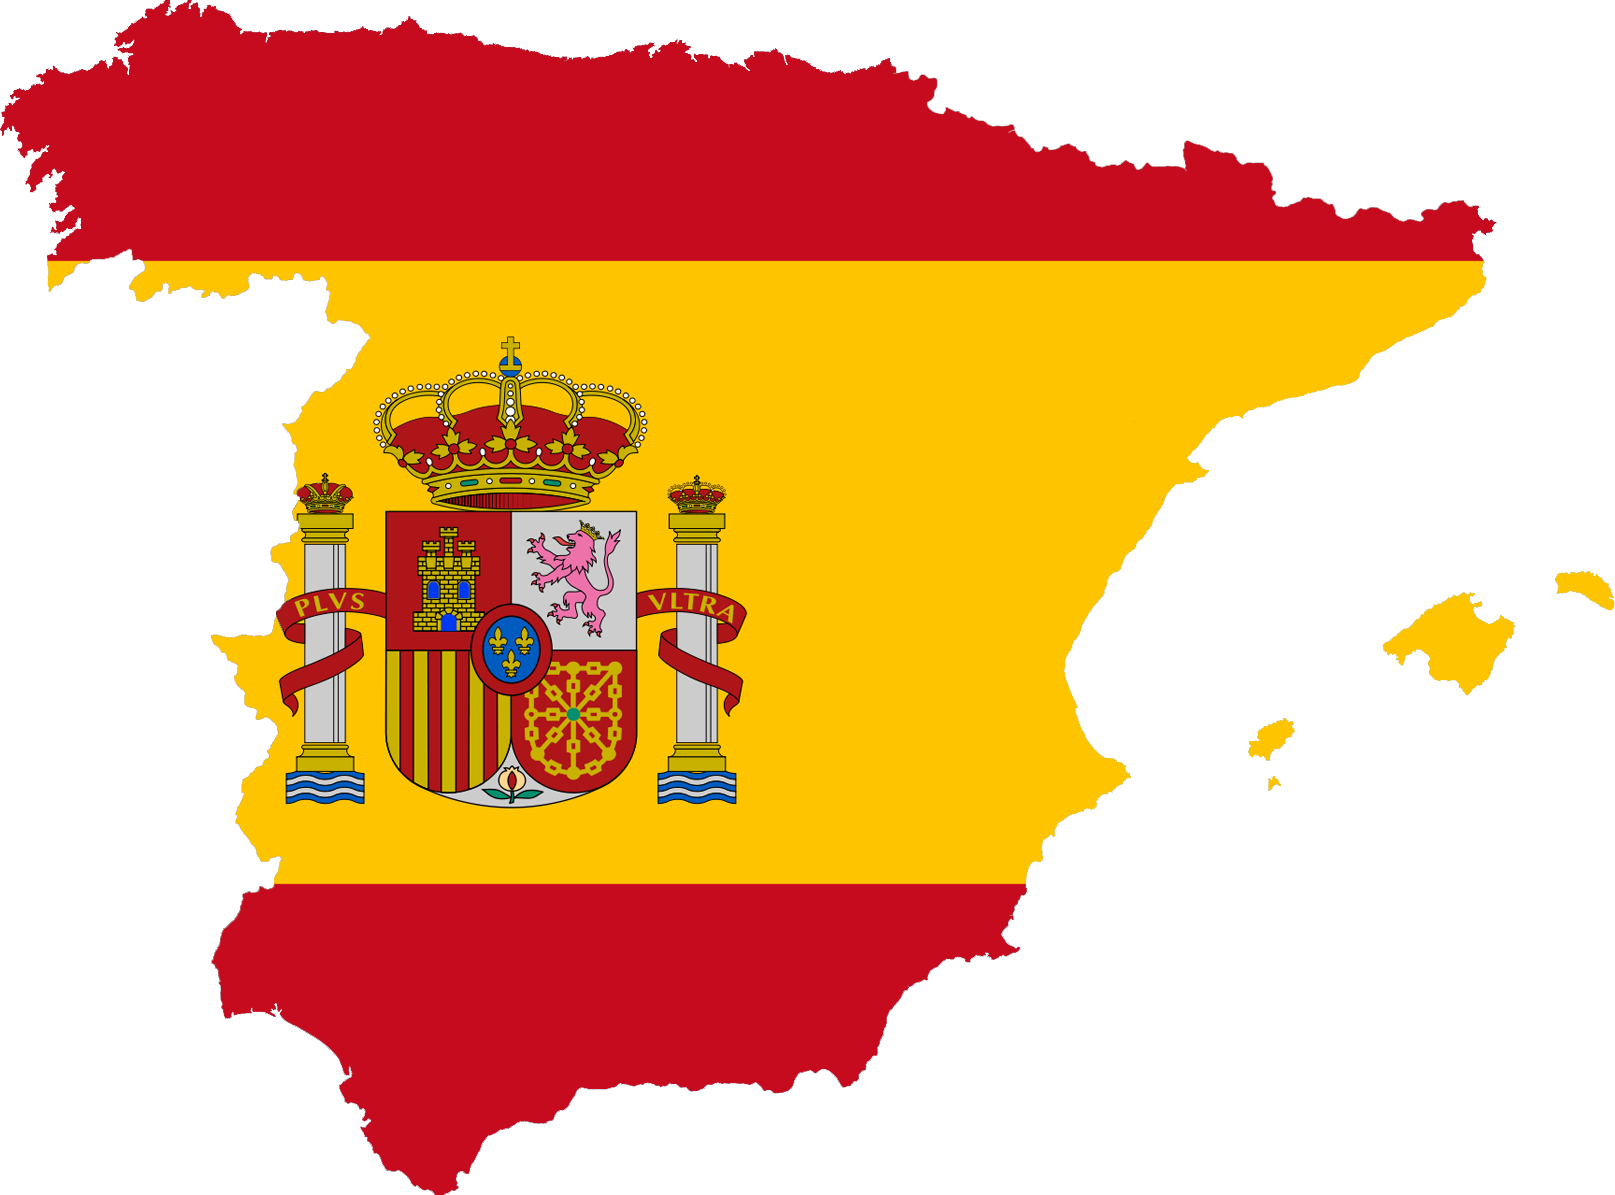 Spain-flag-map-plus-ultra.png